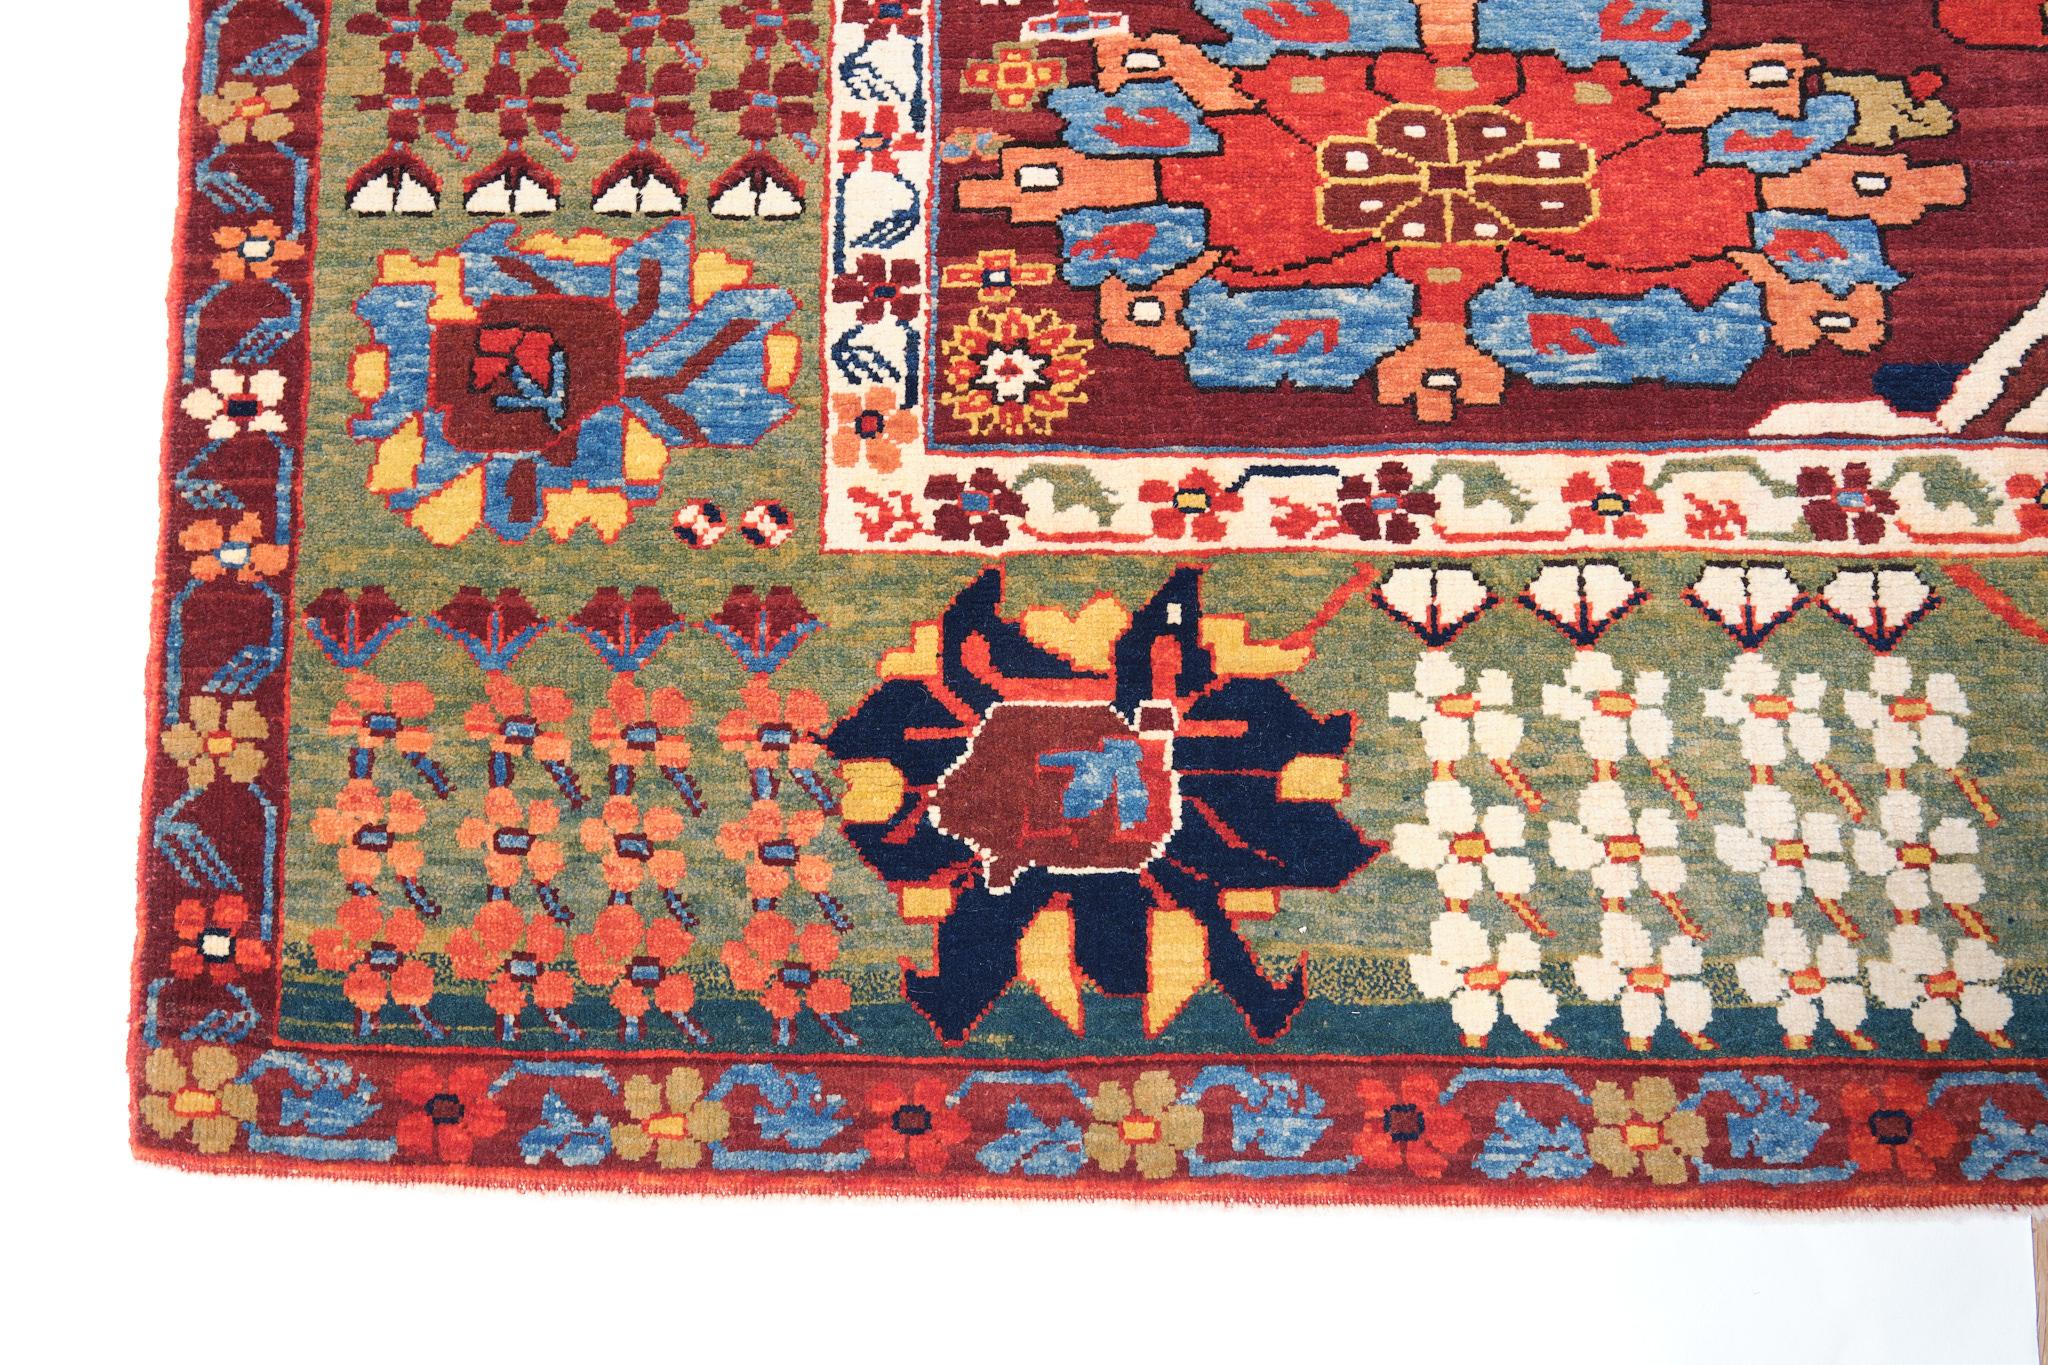 The source of rug comes from the book Antique Rugs of Kurdistan A Historical Legacy of Woven Art, James D. Burns, 2002 nr.42. This is a beautiful urban-produced, later example of the vase design carpets, so called because several of them have large